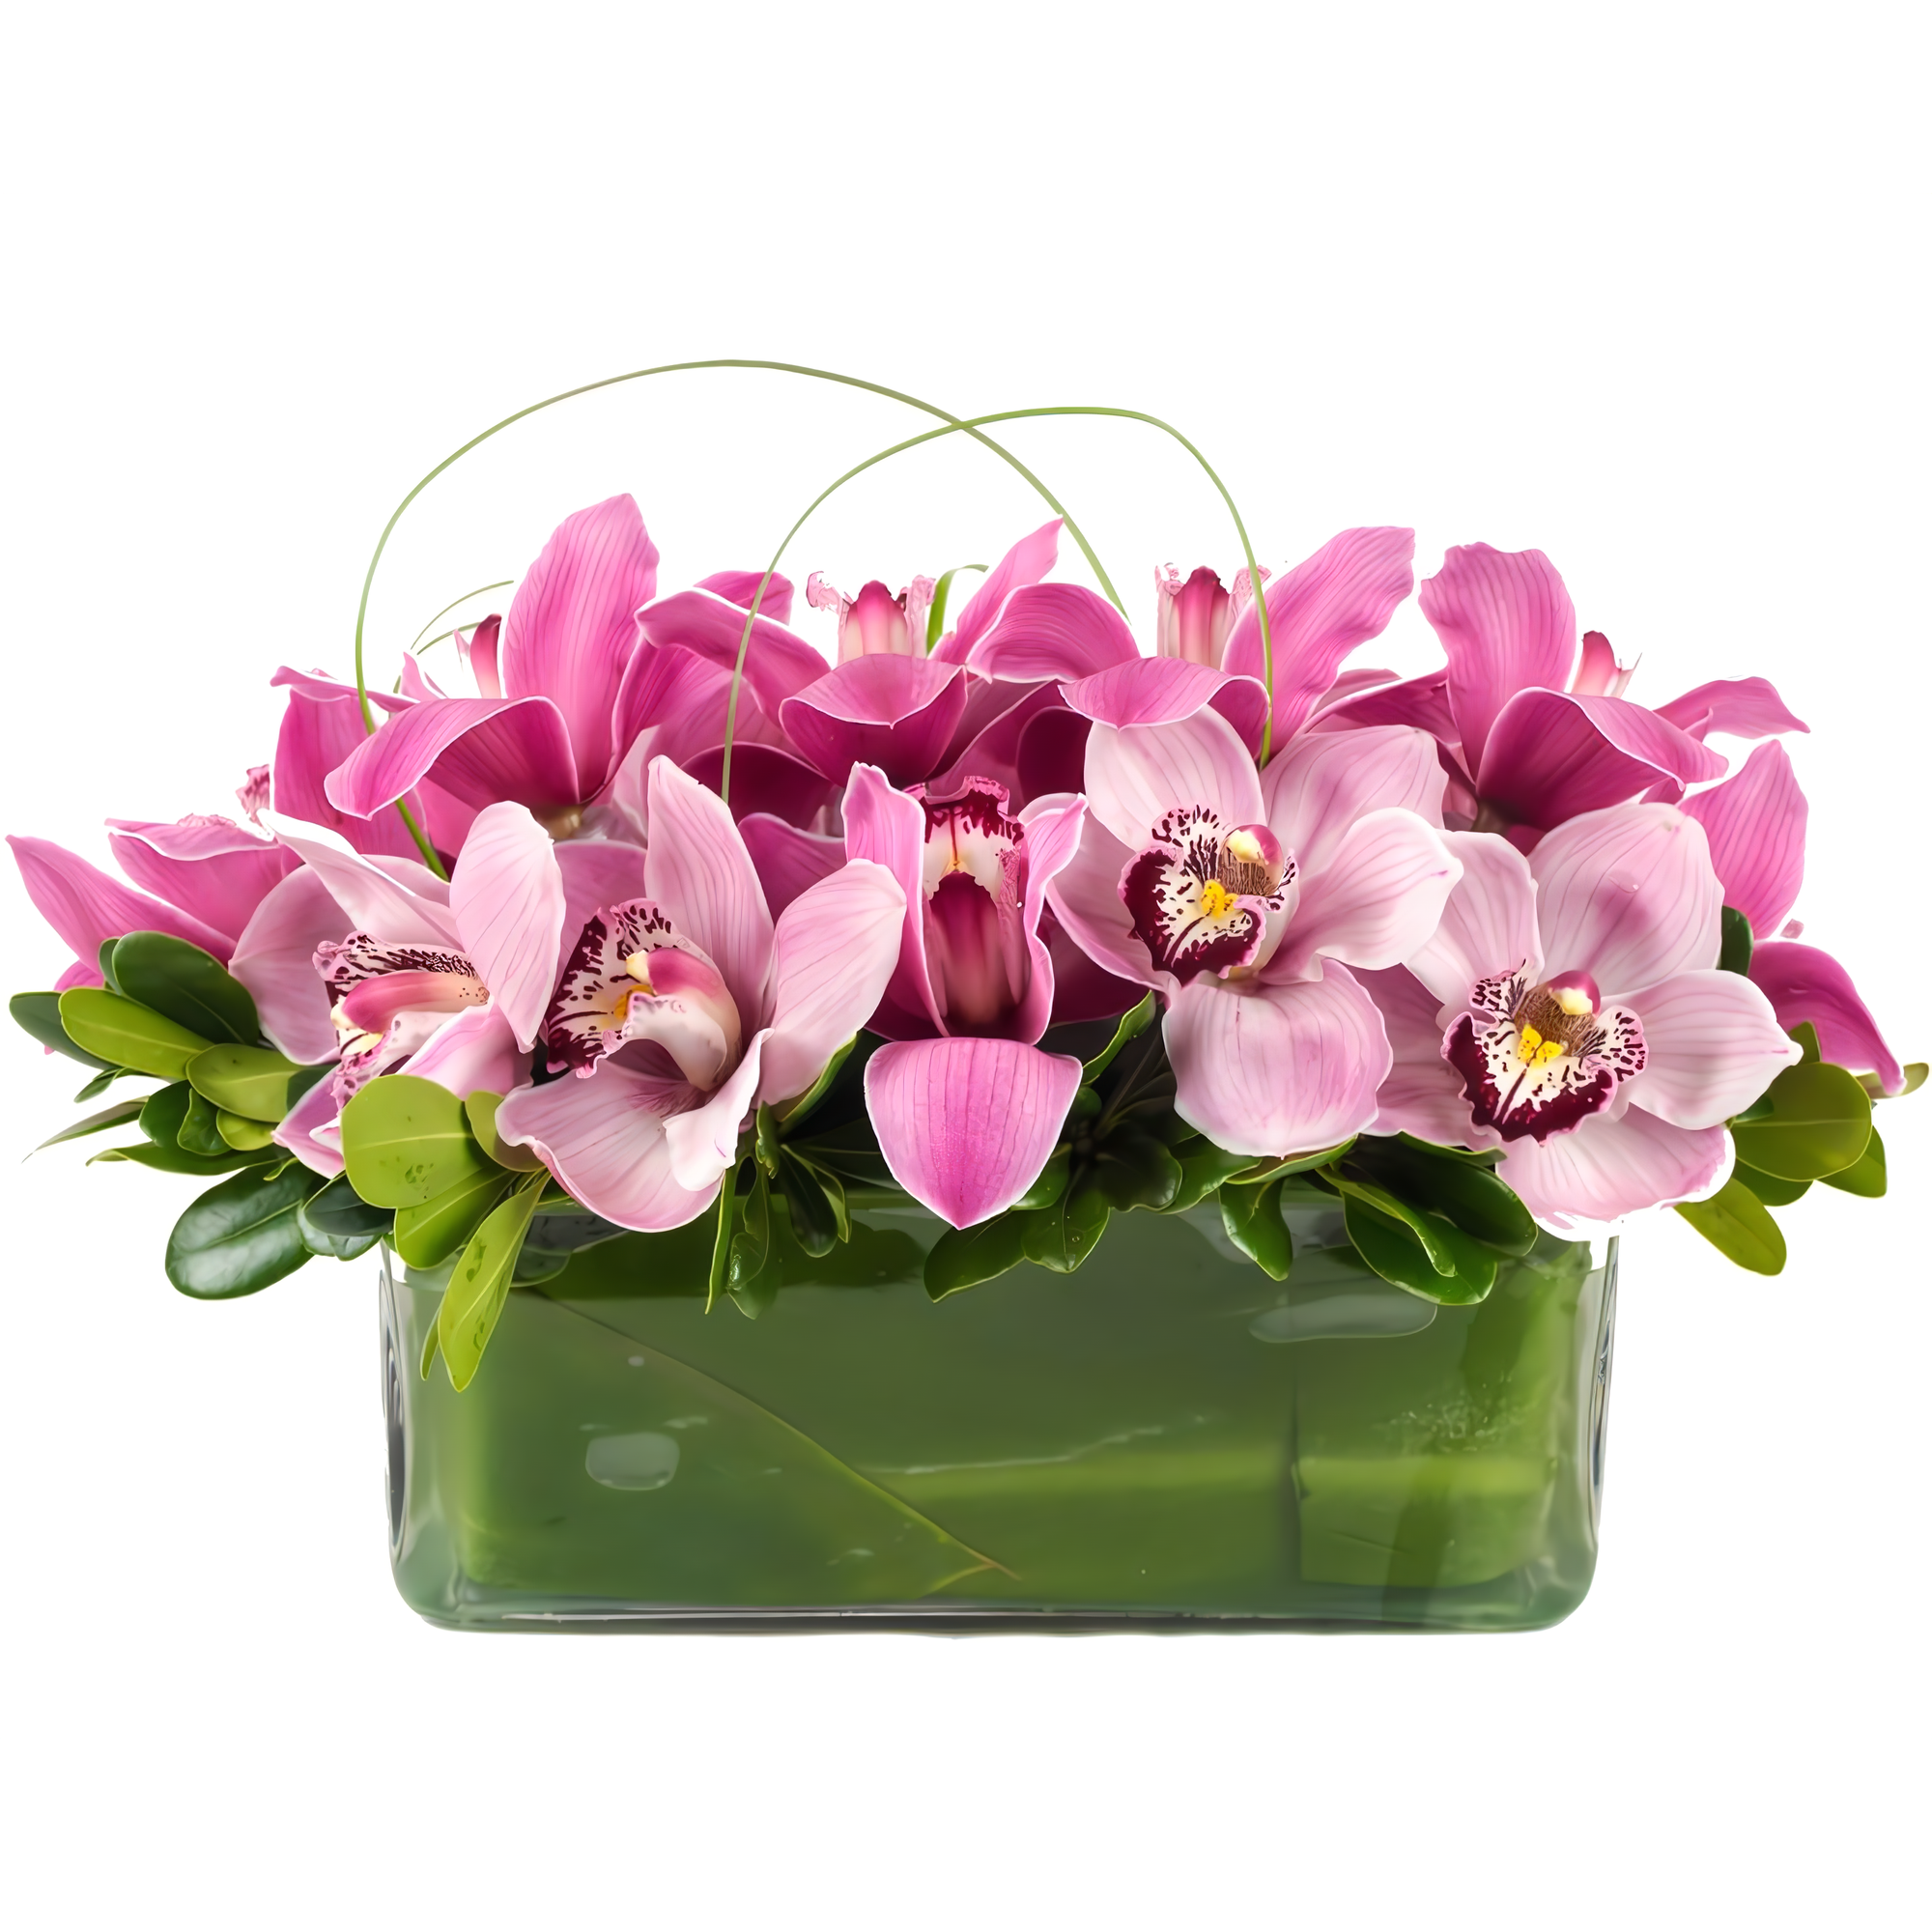 Manhattan Flower Delivery - Pink Me Up! - Occasions > Anniversary